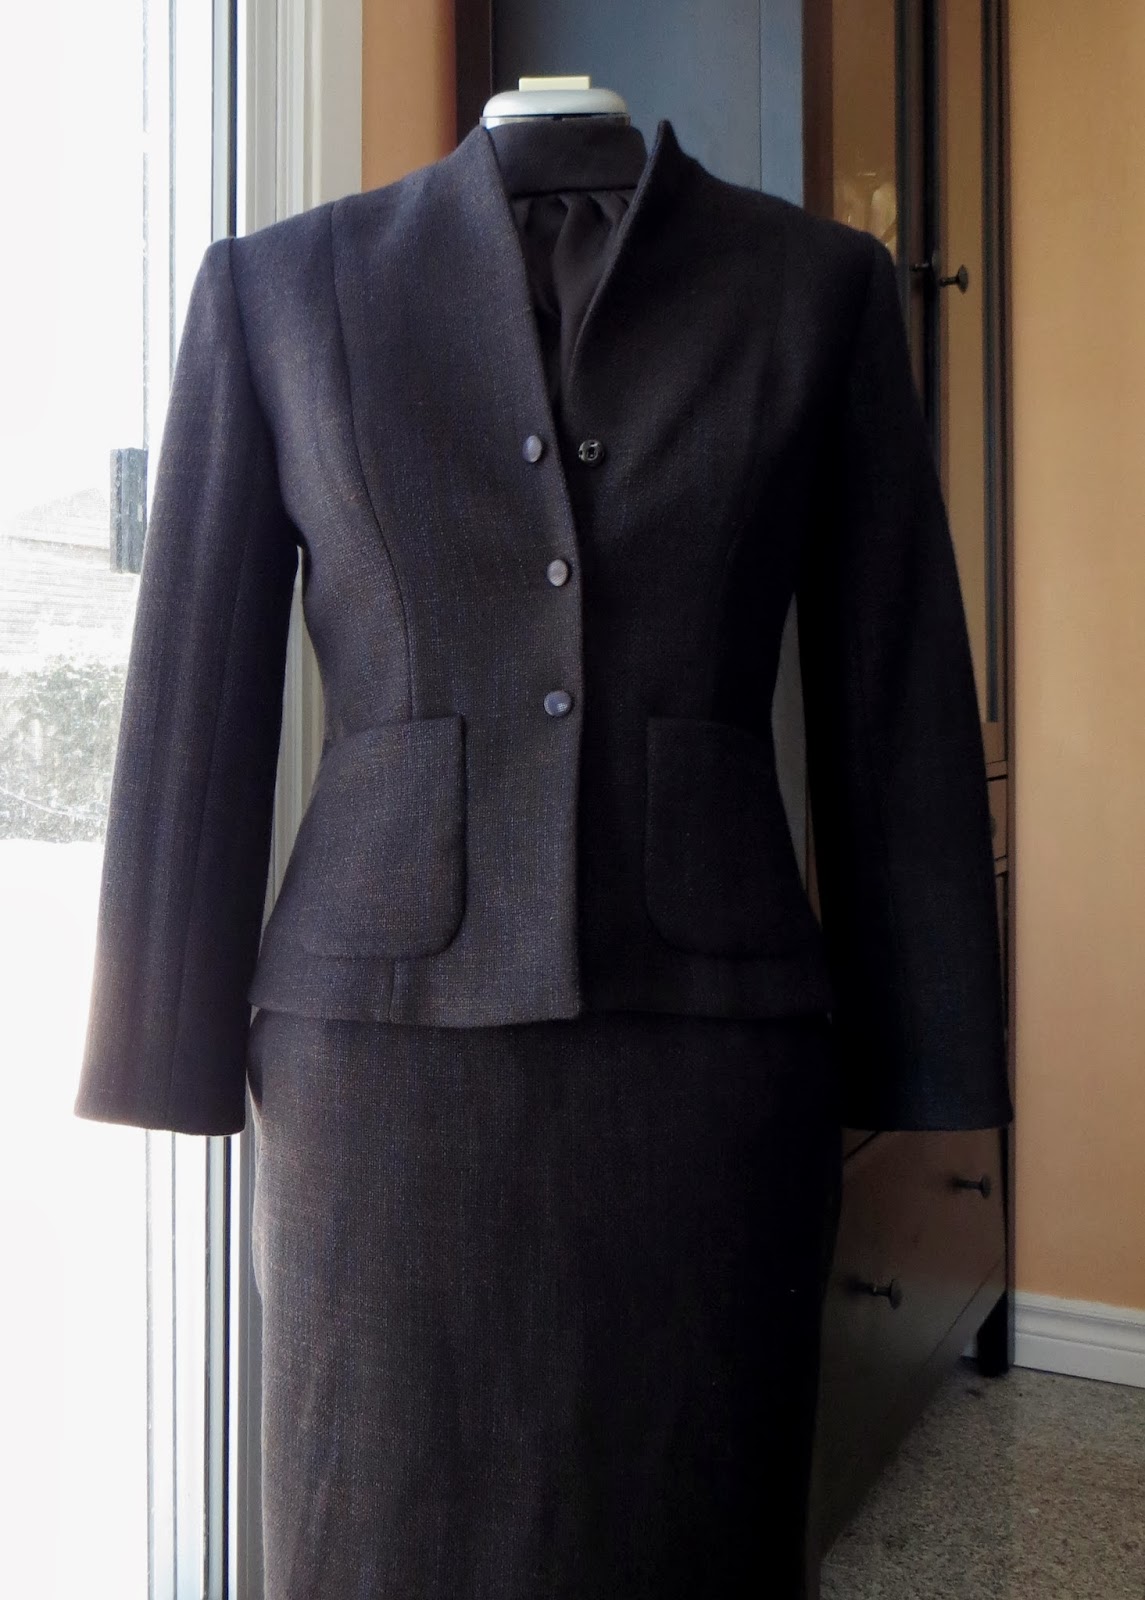 StraightJacket Muse: Brown blue cashmere suit: stashbusting really works!